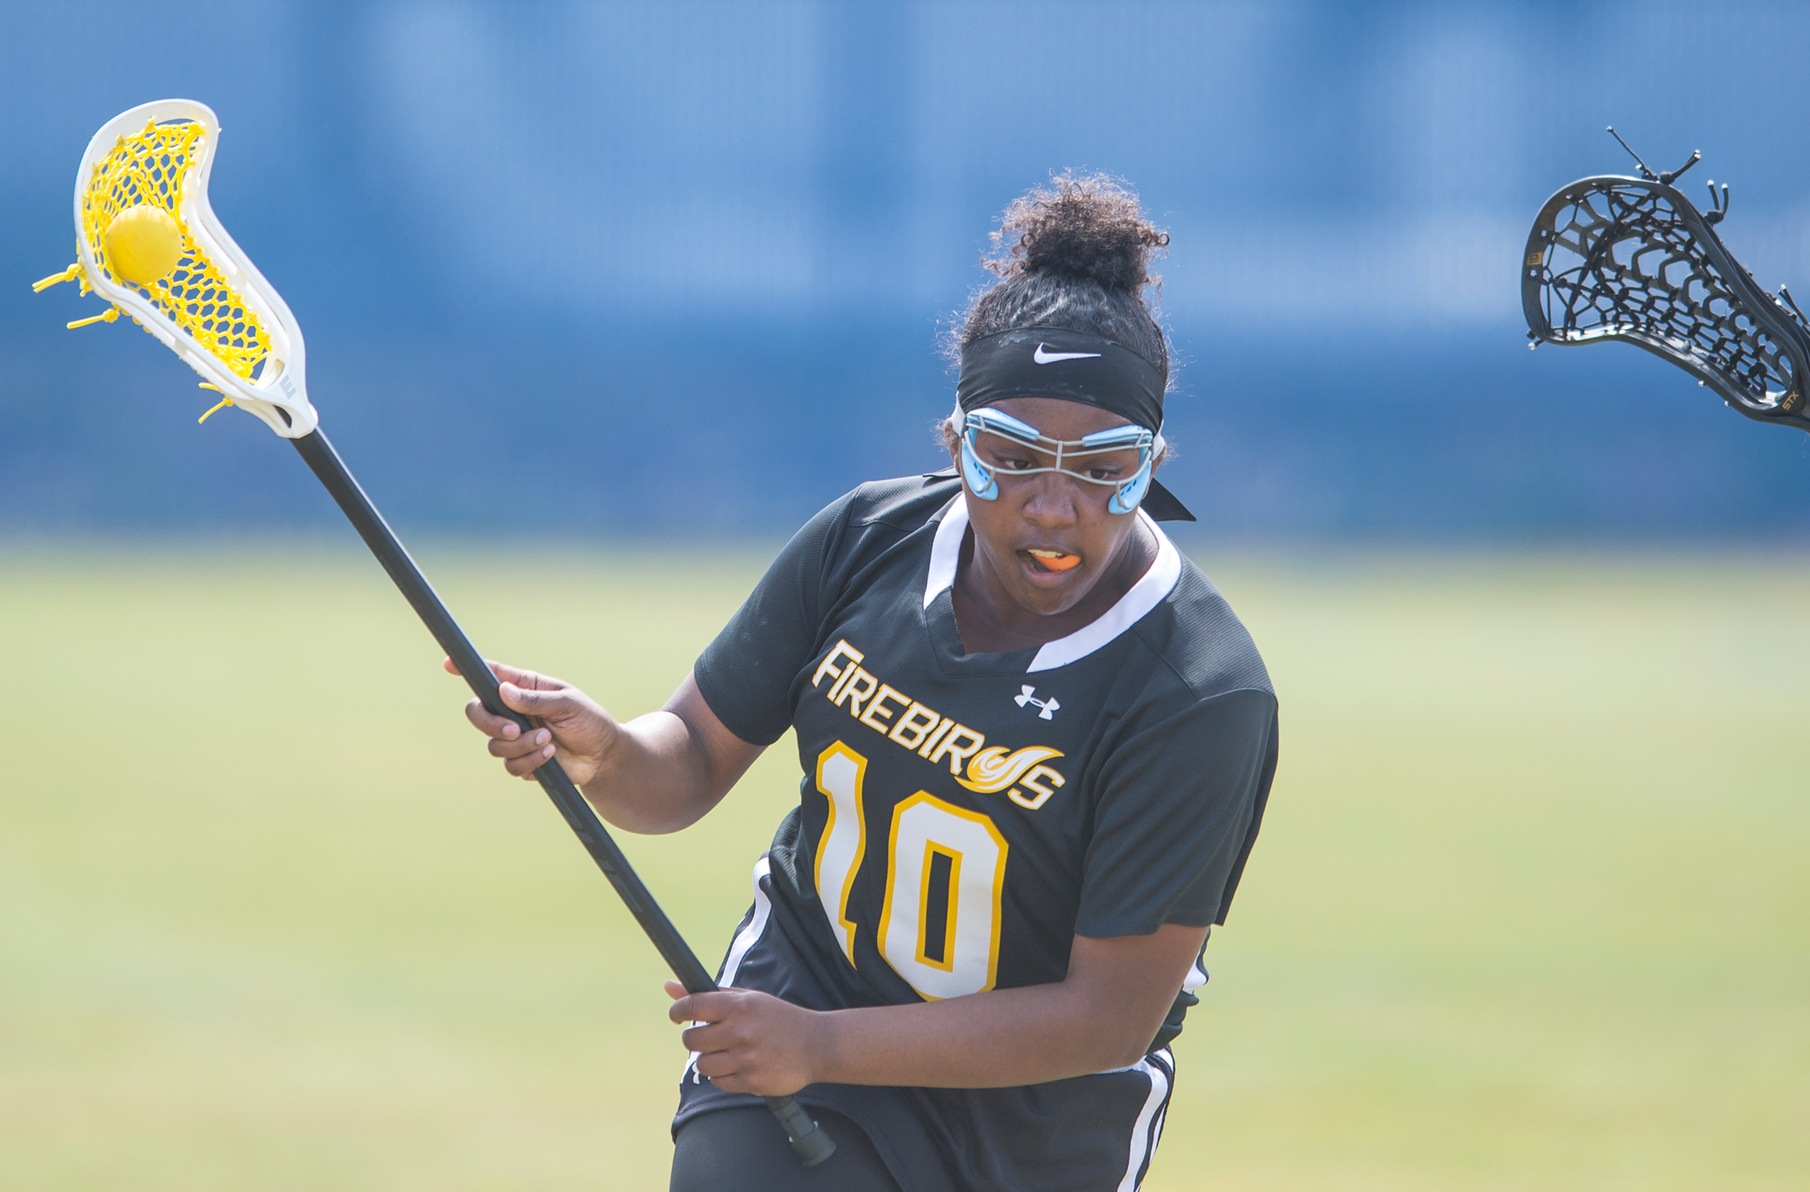 Firebirds had two hat tricks with a season high six goals in game against St. Thomas Aquinas.